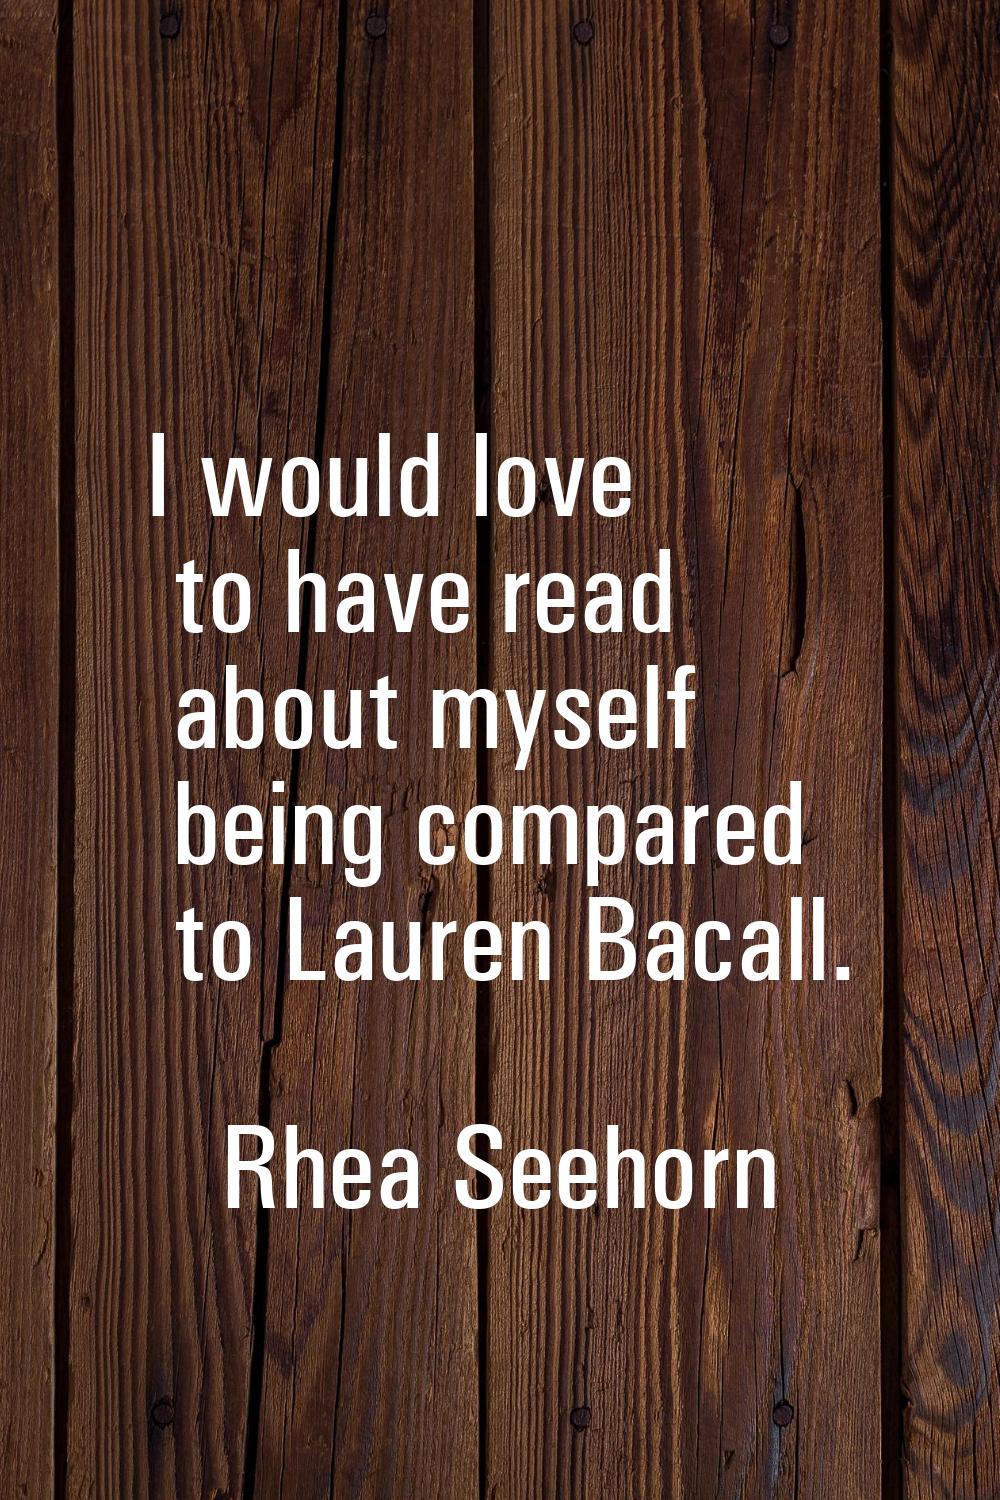 I would love to have read about myself being compared to Lauren Bacall.